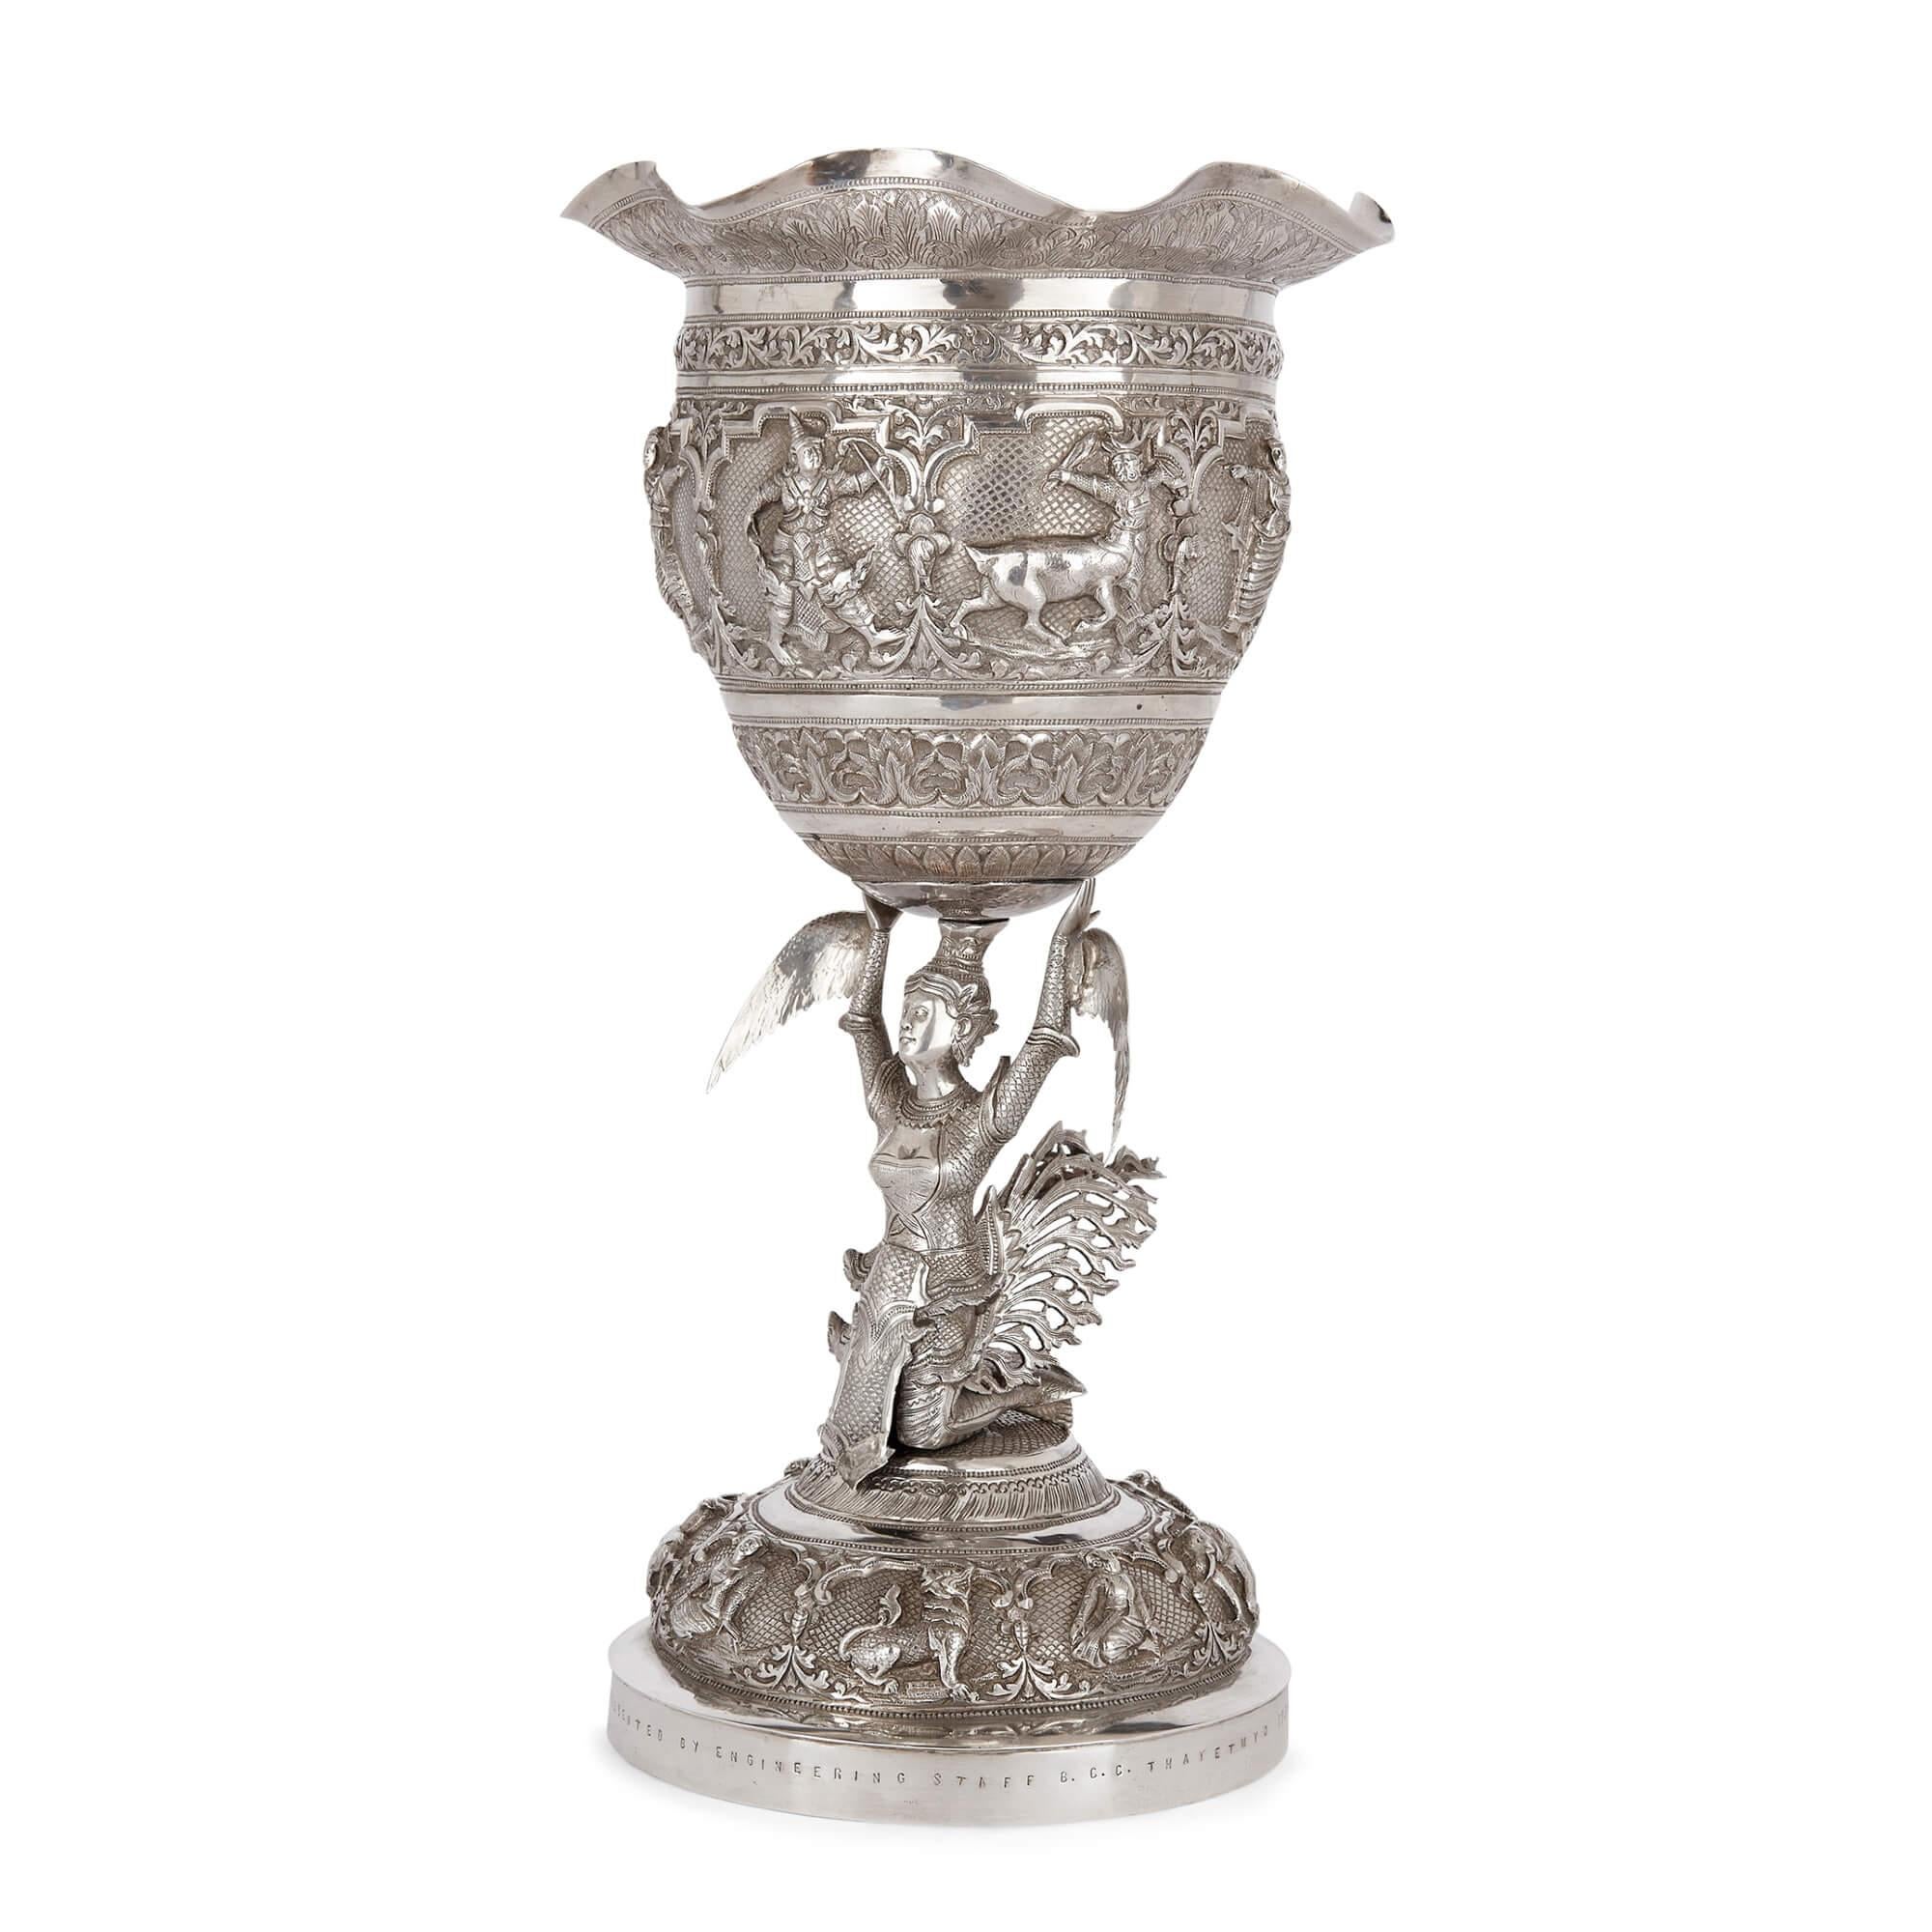 A Burmese embossed silver presentation chalice
Burmese, early 20th century
Measures: Height 31cm, diameter 16.5cm, weight 937 grams

This remarkable and beautiful silver chalice, or trophy, was made in Burma in the late 1930s and offers a